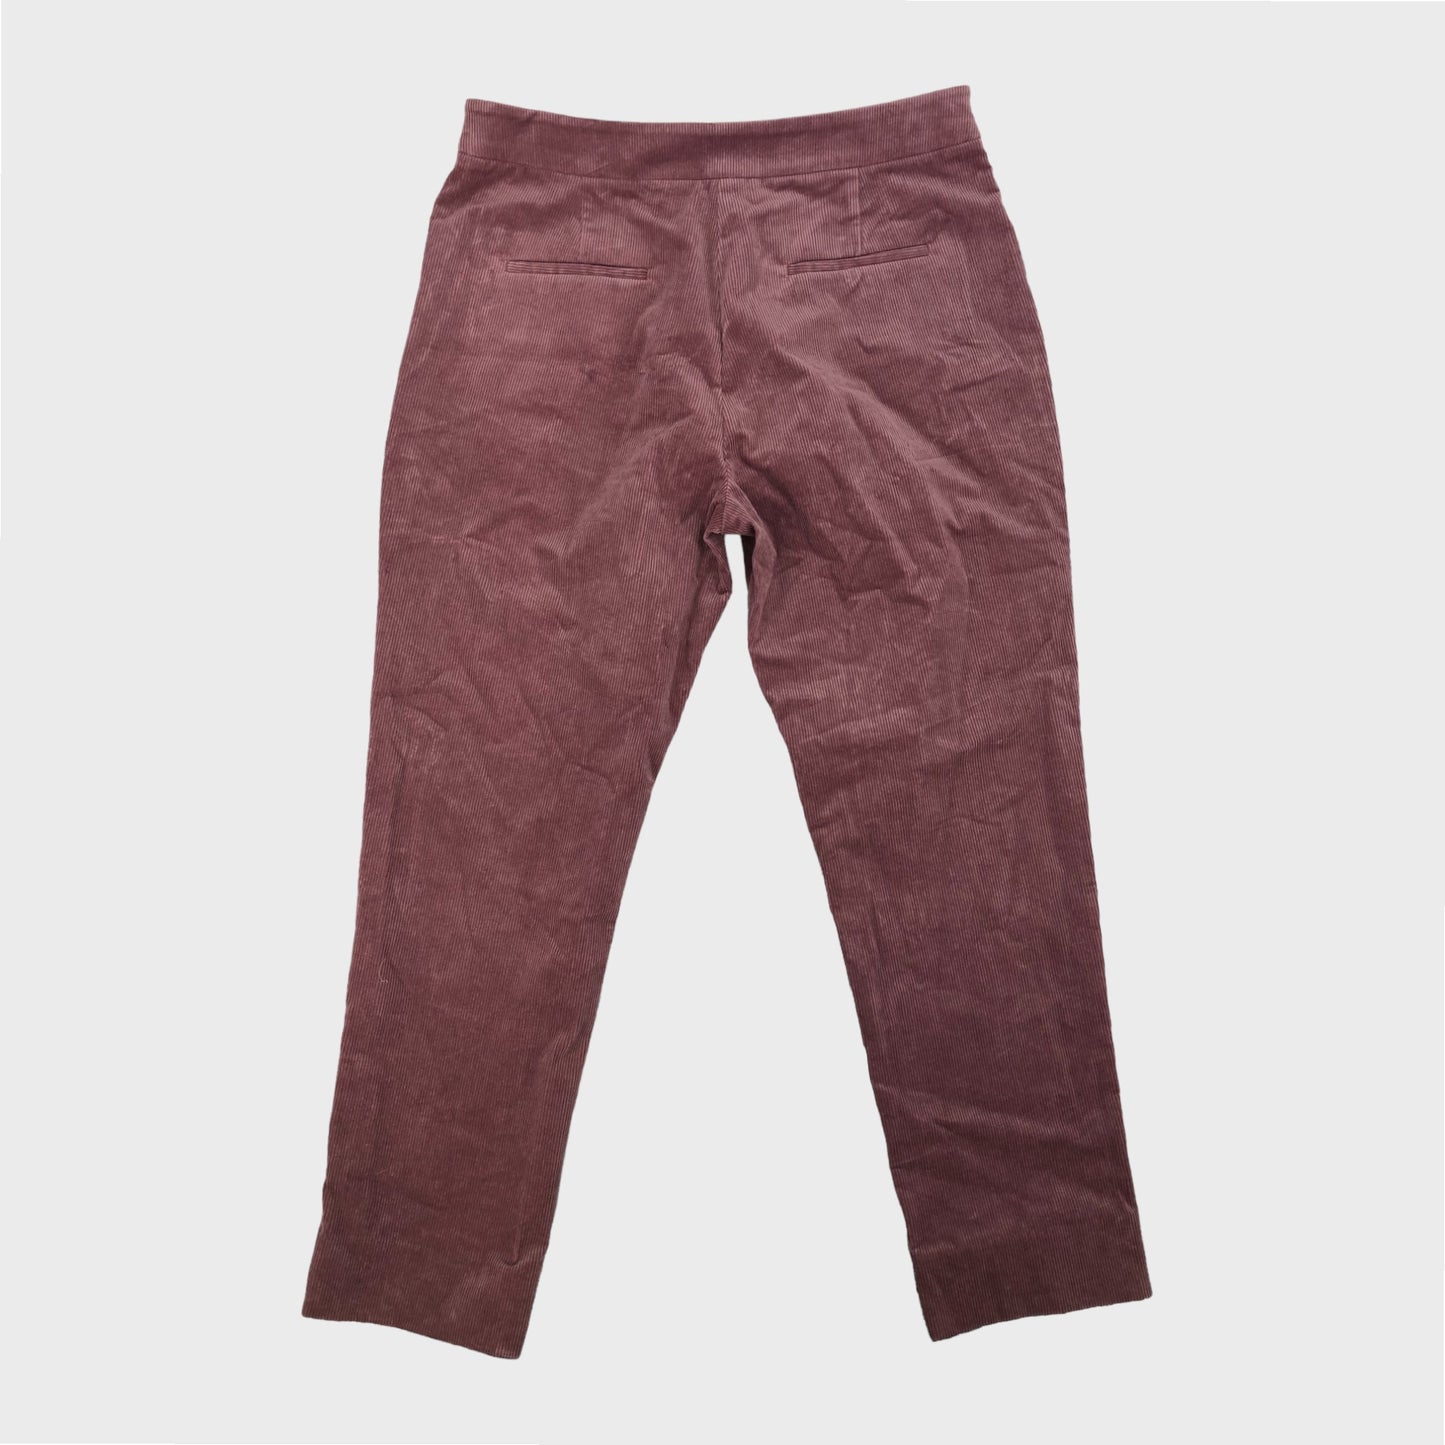 Blush Pink Branded Corduroy Trousers